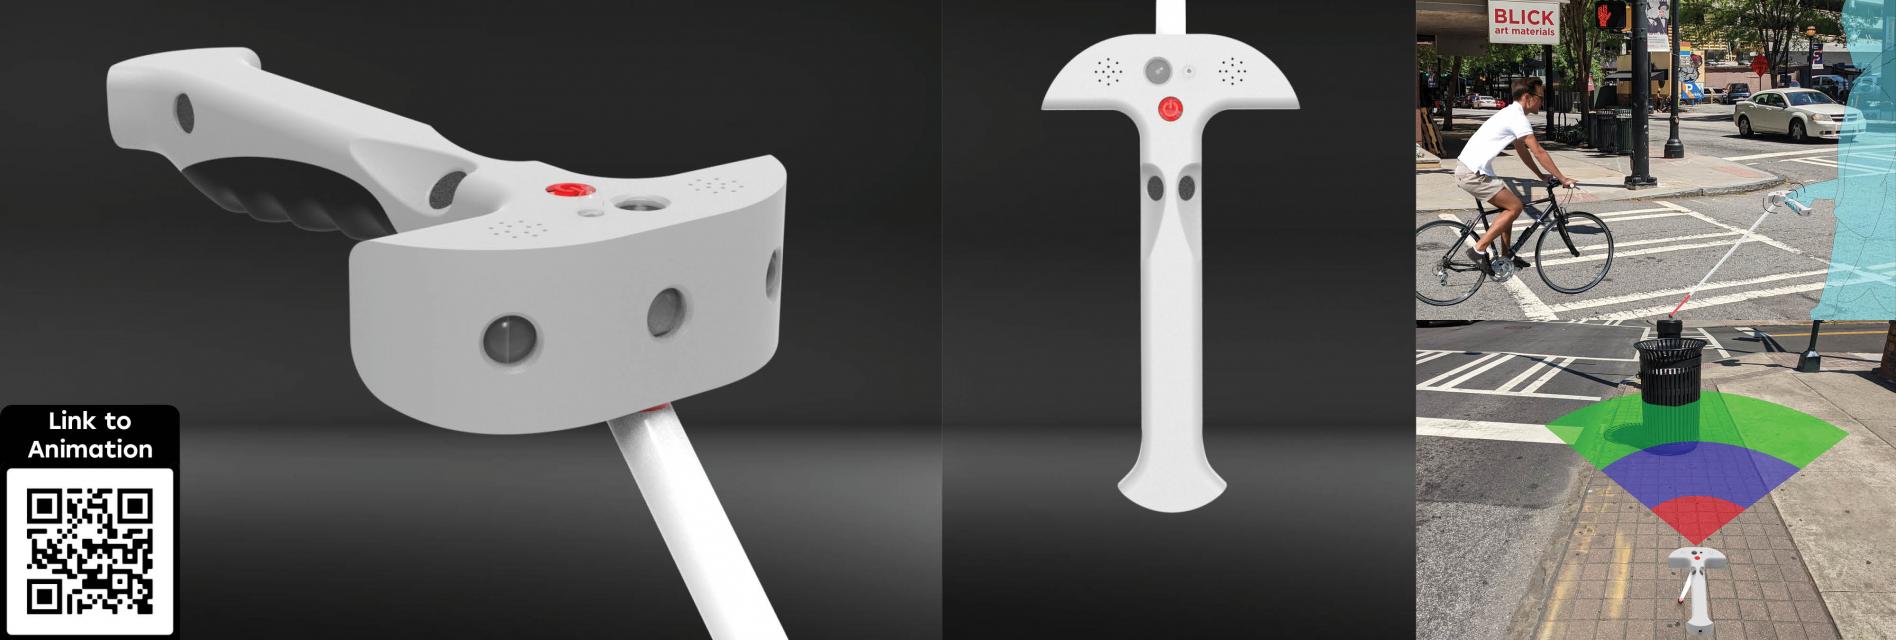 Renders of a white cane-like tool